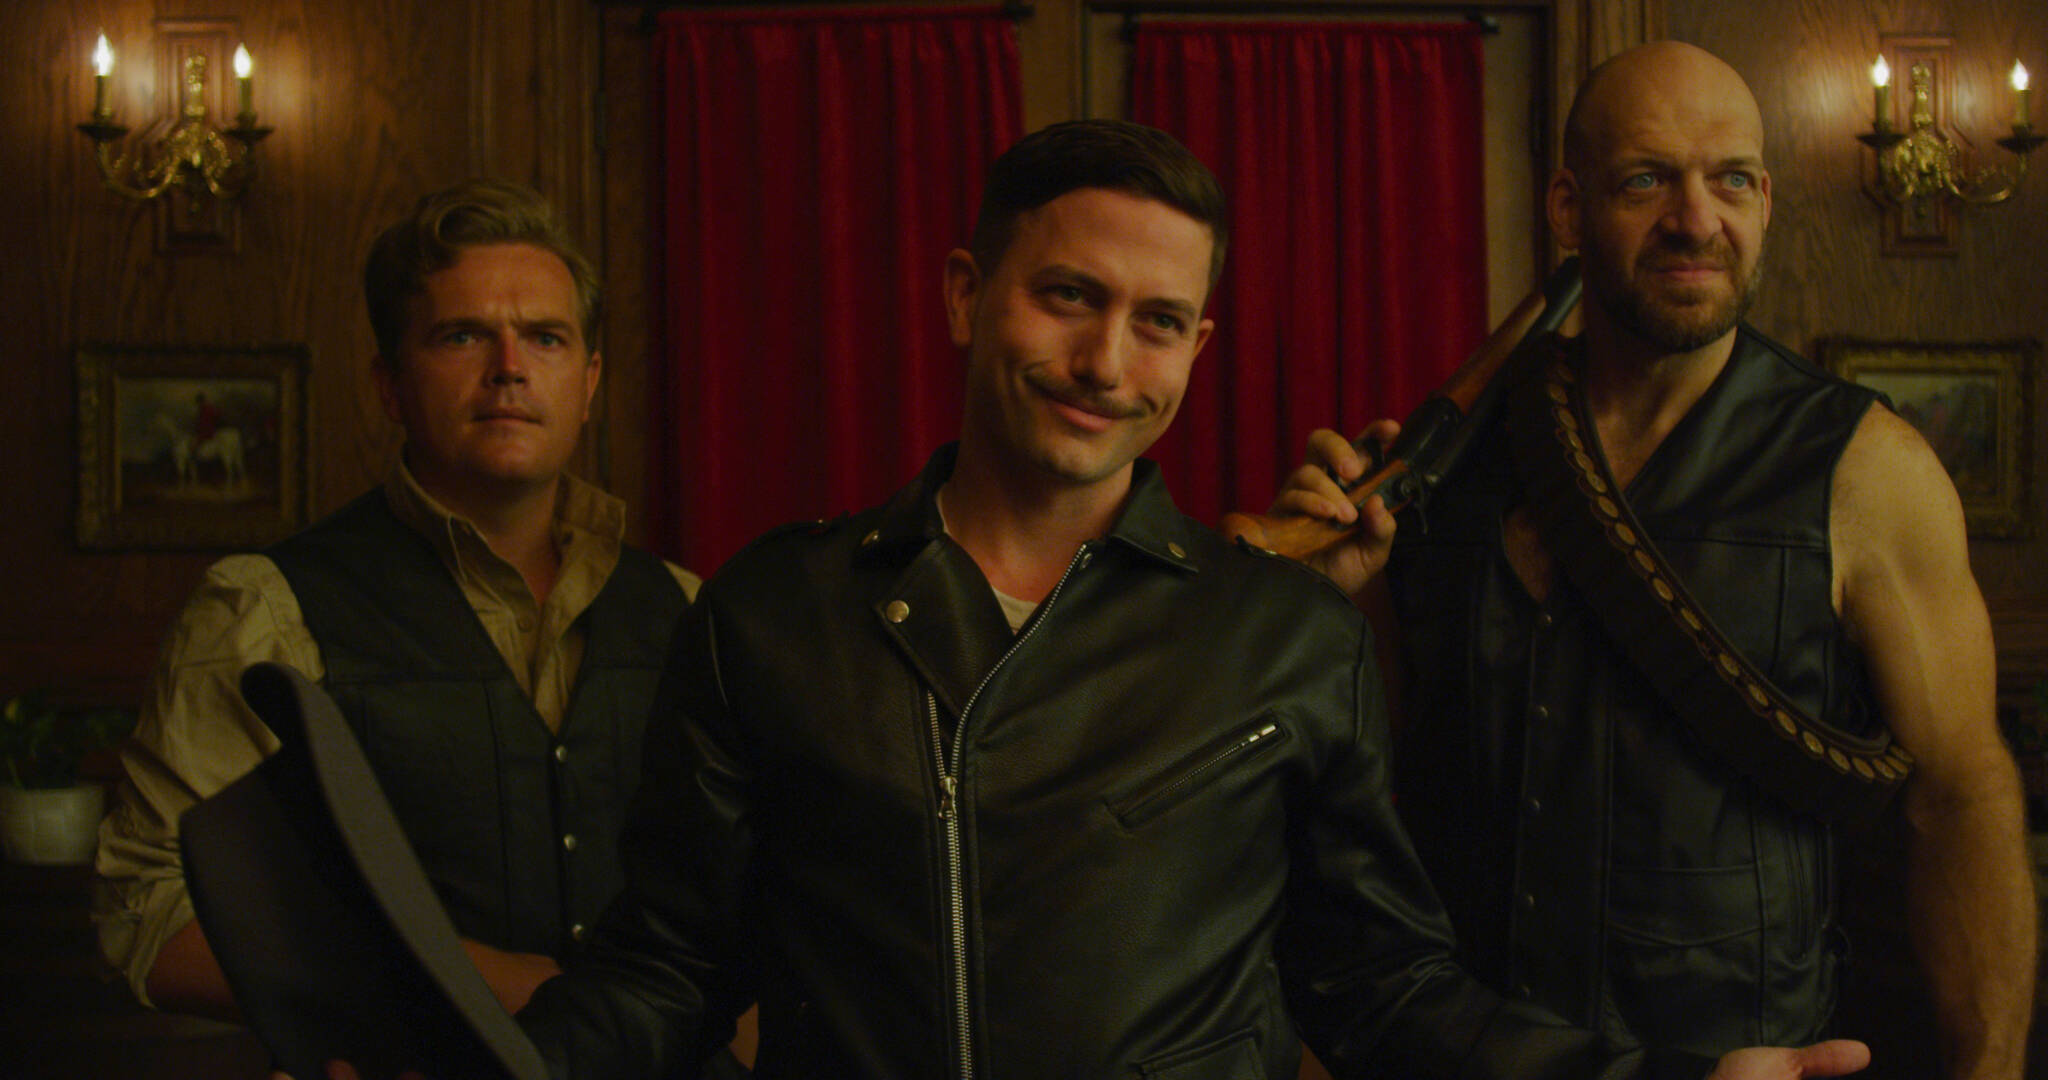 Jackson Rathbone as Fritz Ziegler next to Nazi henchmen in “Condor’s Nest,” in theaters, on demand and digital release on Friday. (Courtesy Photo / PMKBNC)